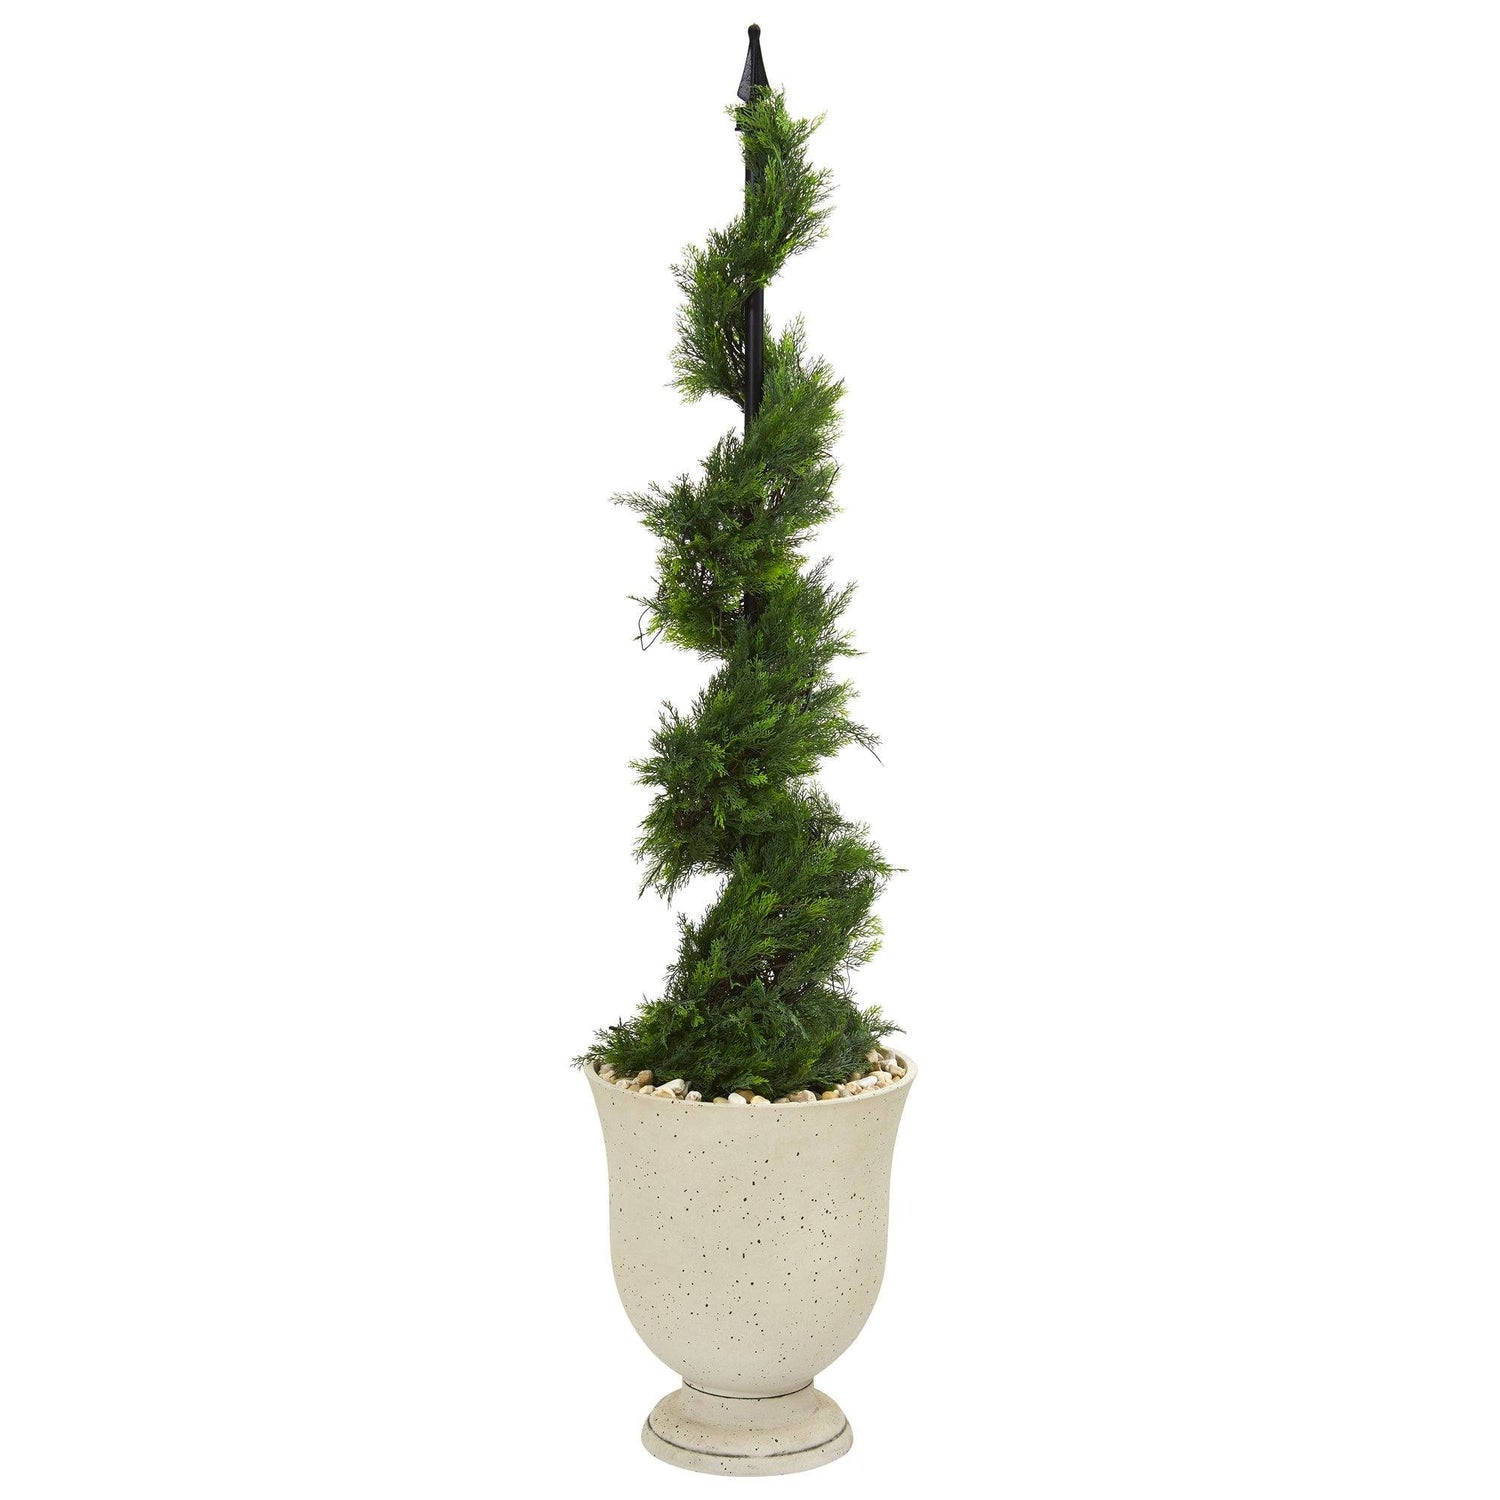 58” Cypress Artificial Spiral Topiary Tree in Decorative Urn